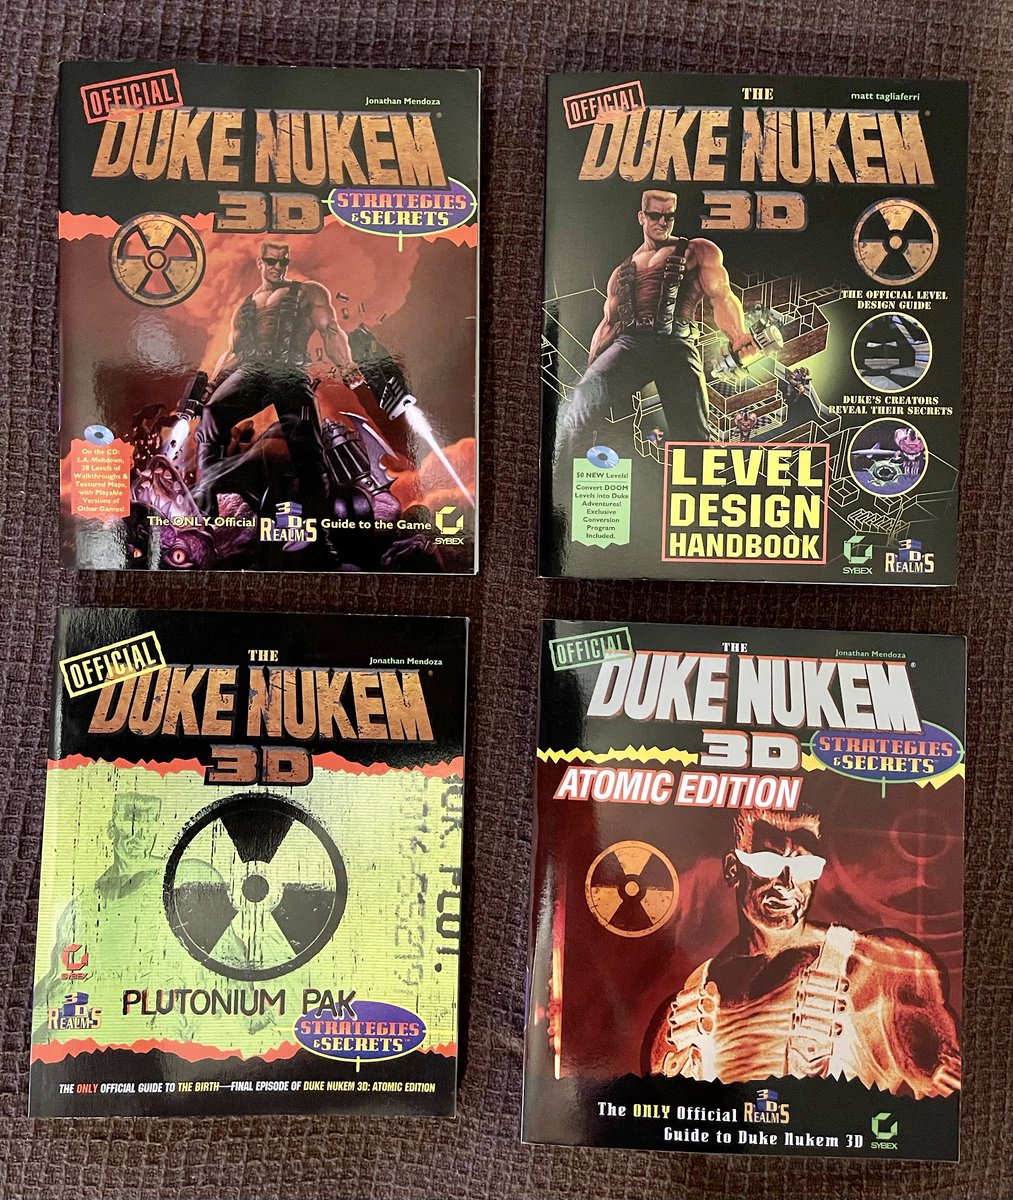 I have at least a dozen different Duke Nukem 3D books. These four here, by Sybex, were all officially licensed by @Apogee_Ent. I had to proofread all of these before they went to press looking for any mistakes. Very time consuming and tedious! But worth the effort.